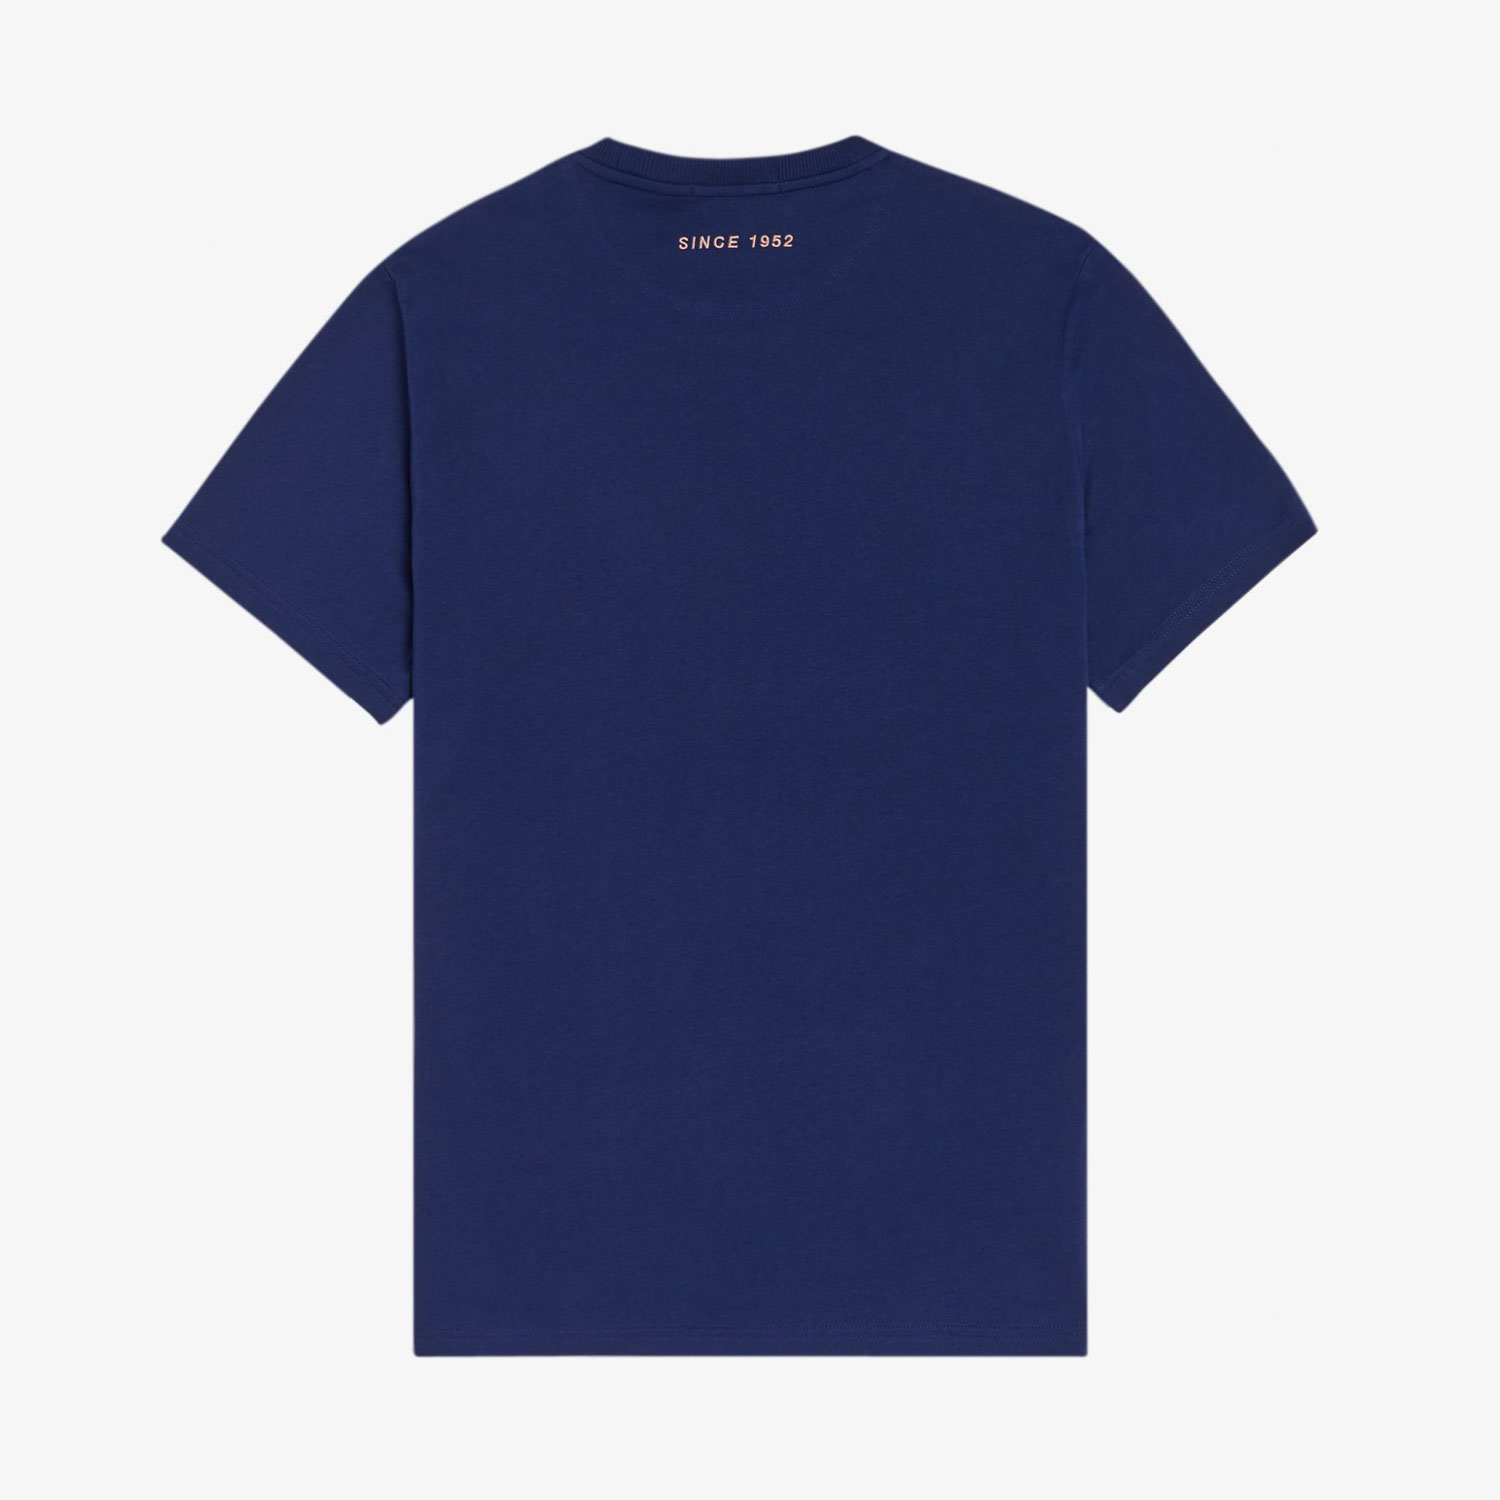 Fred Perry Laurel Wreath Graphic Tee - French Navy